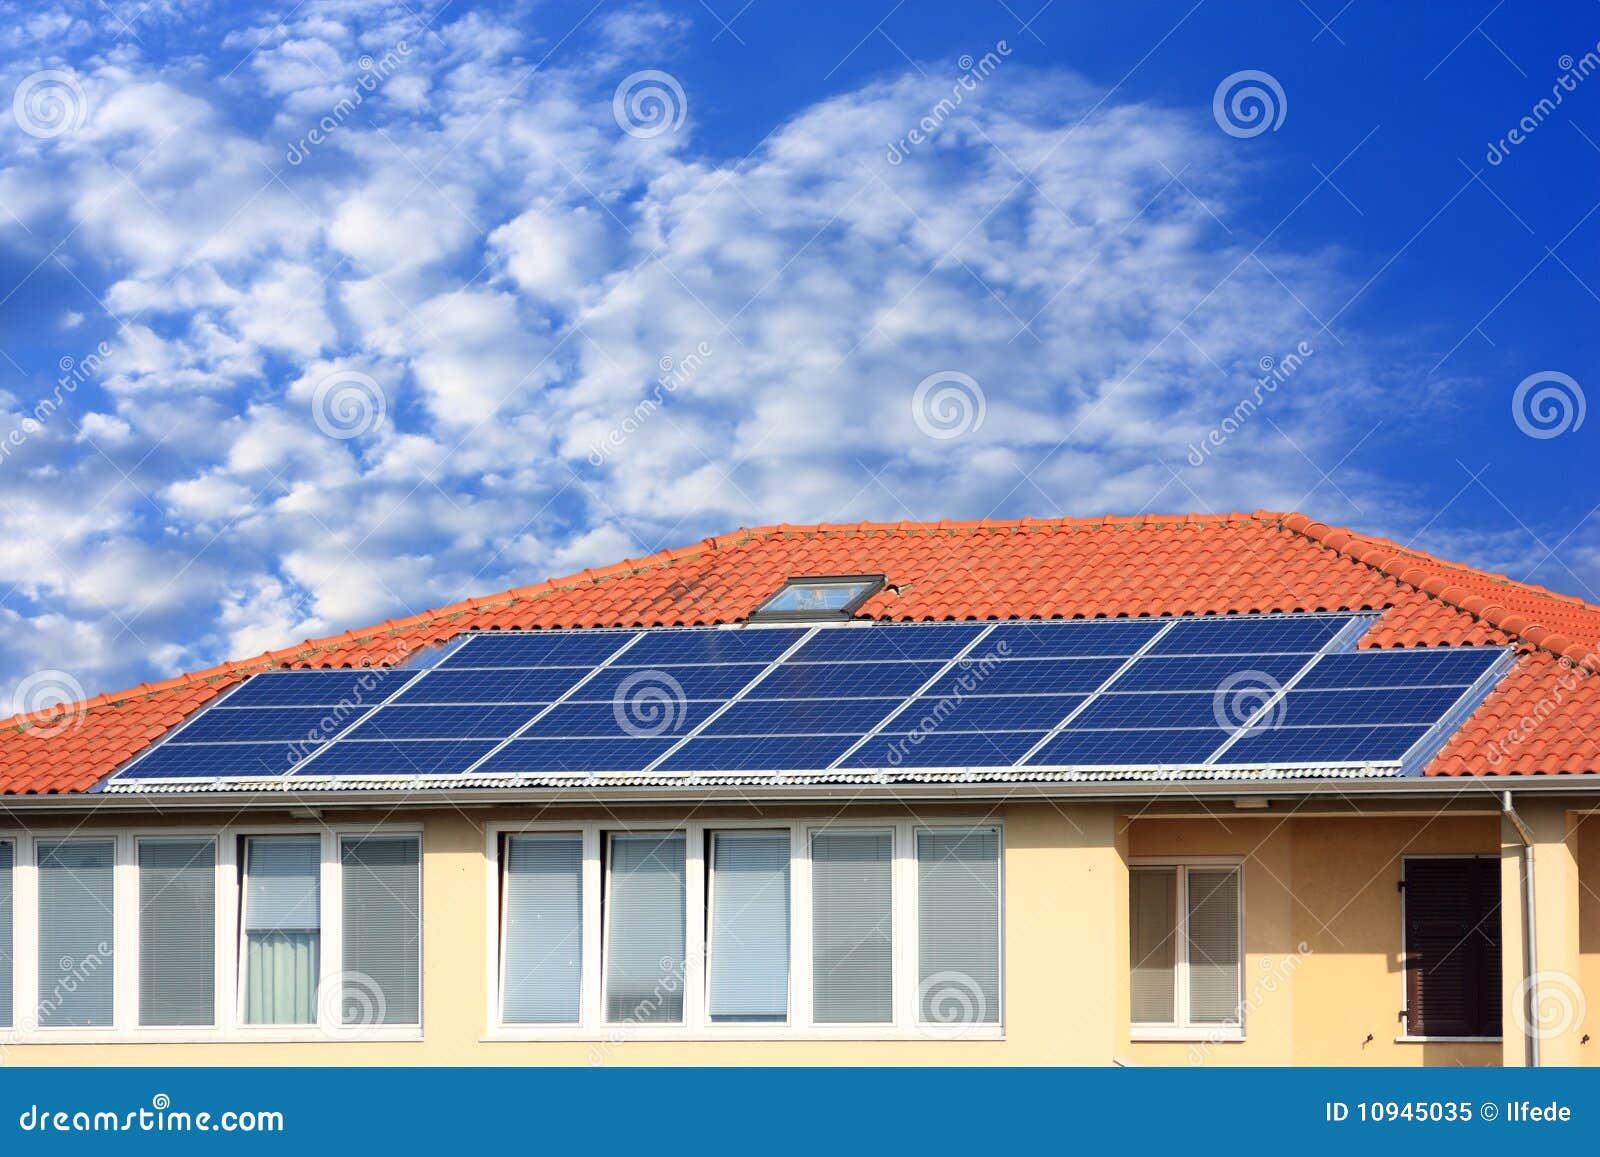 photovoltaic solar panel on roof